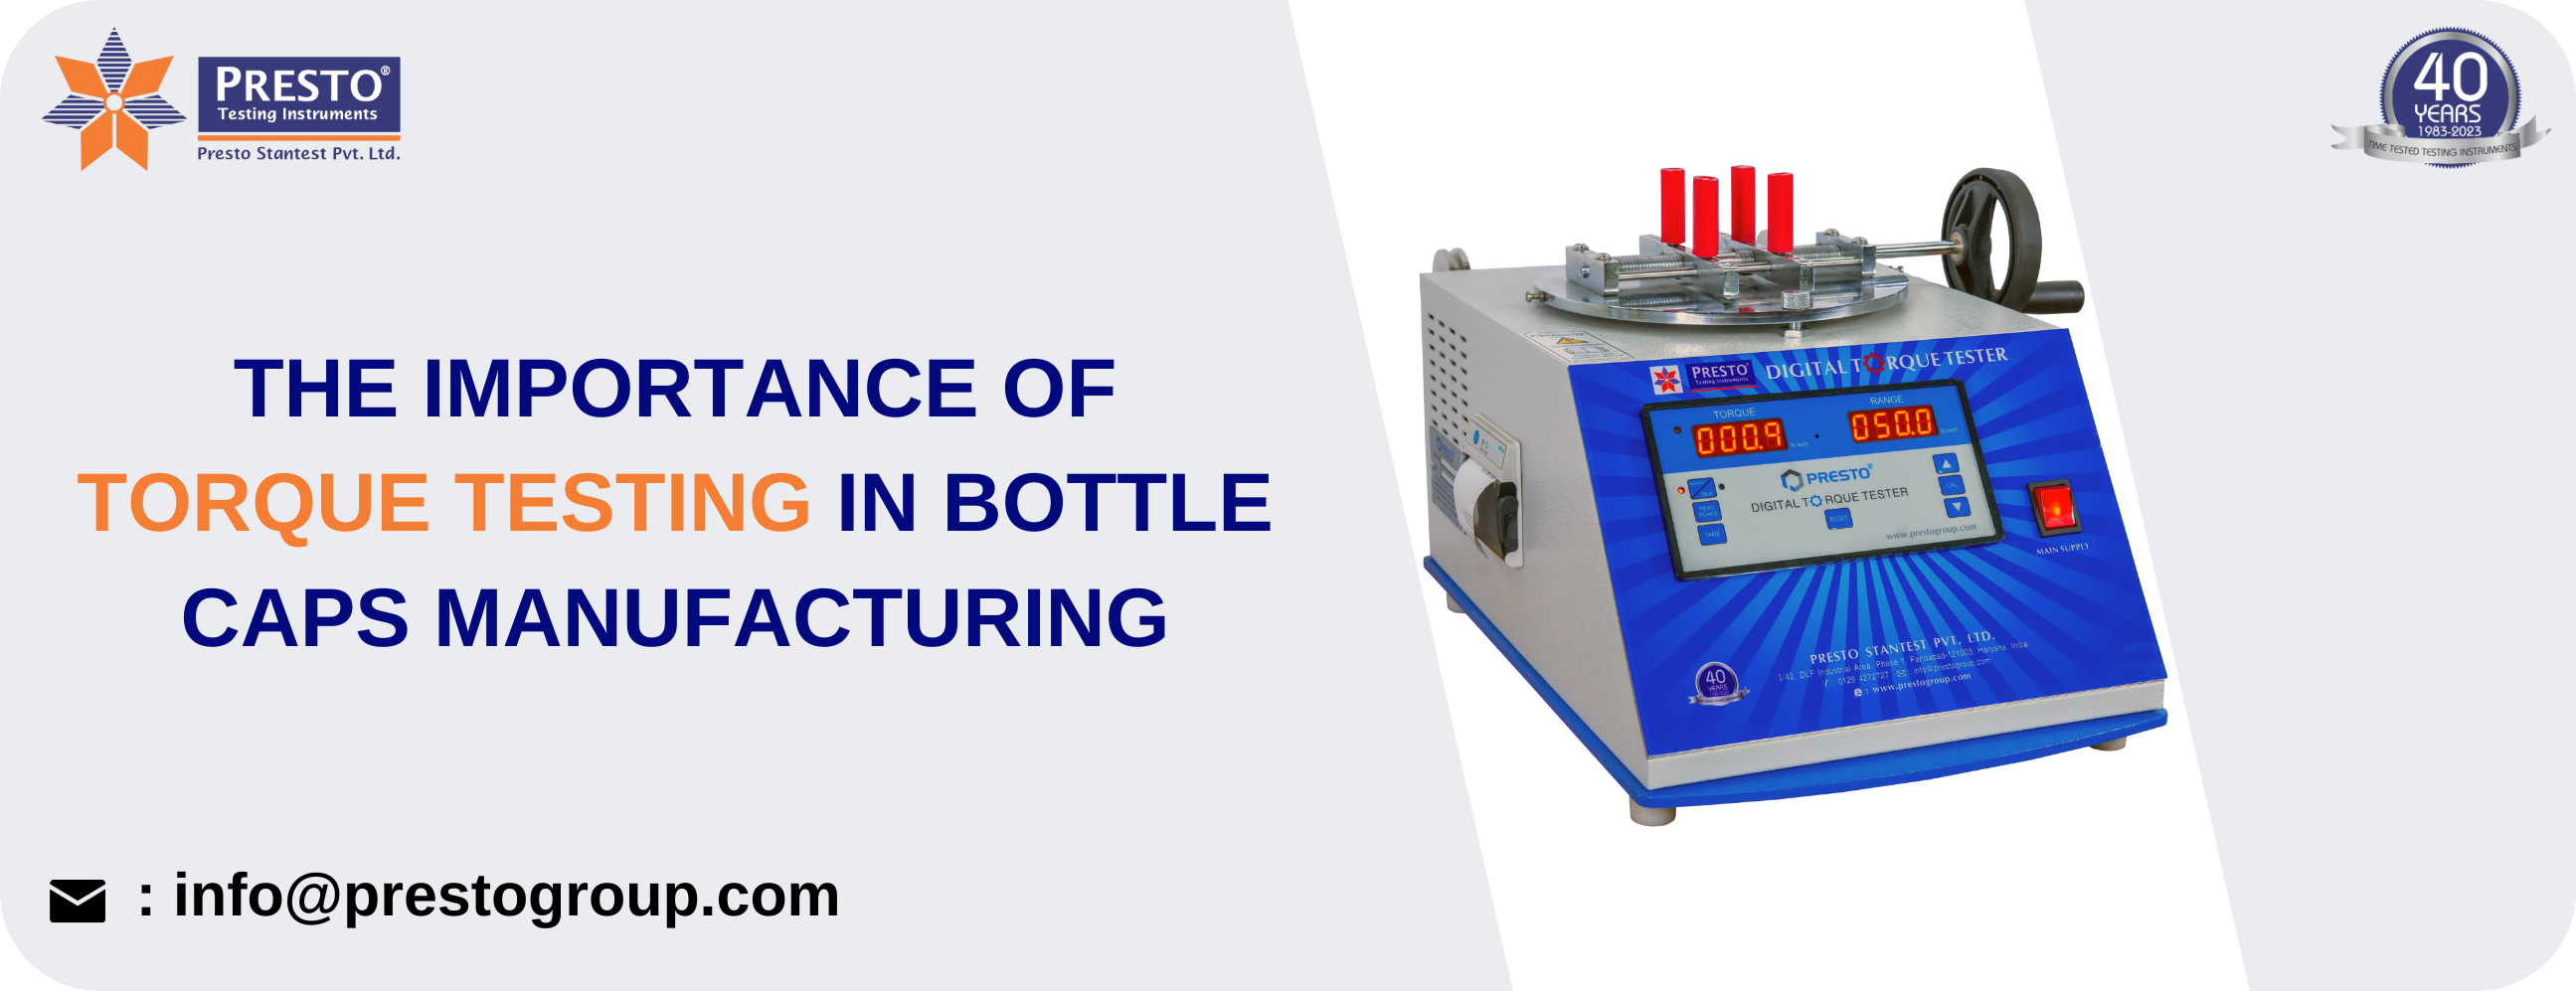 The Importance of Torque Testing in Bottle Caps Manufacturing